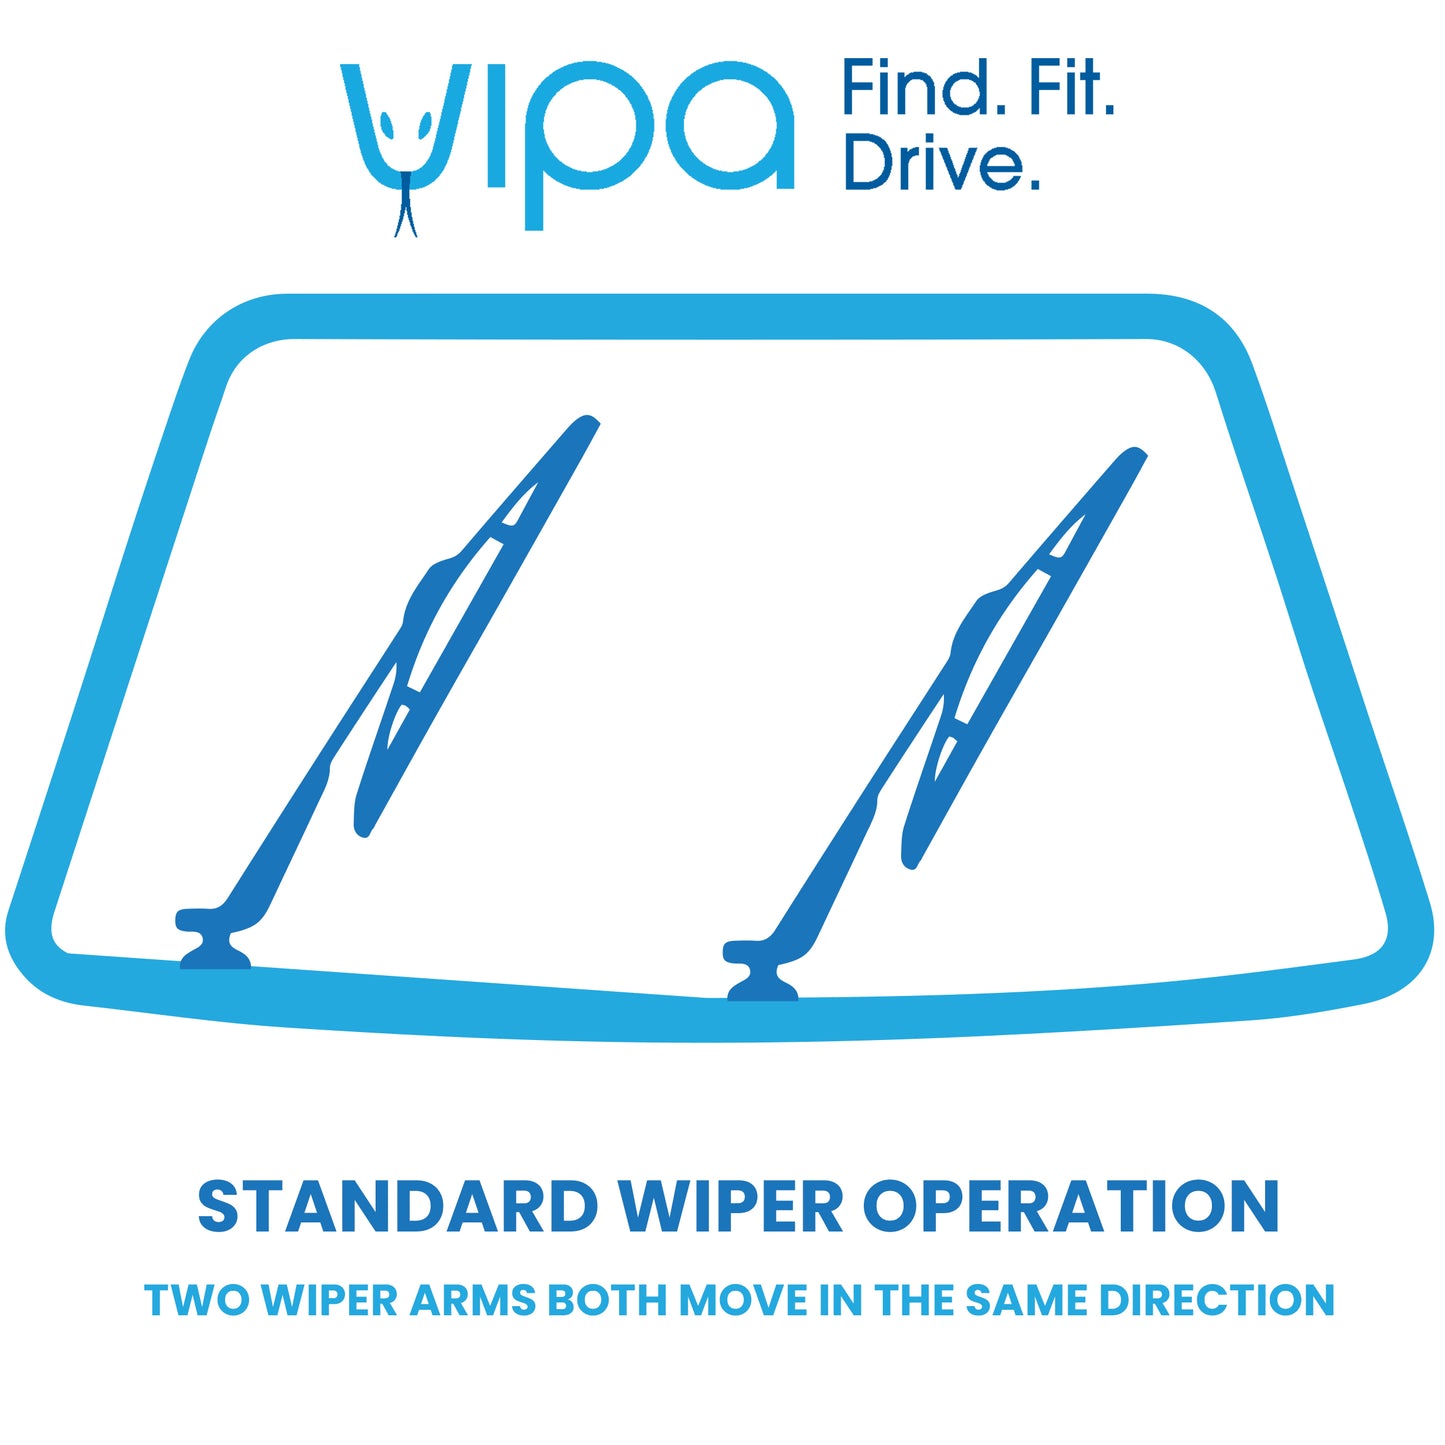 PROTON COMPACT Hatchback Apr 1996 to May 2006 Wiper Blade Kit